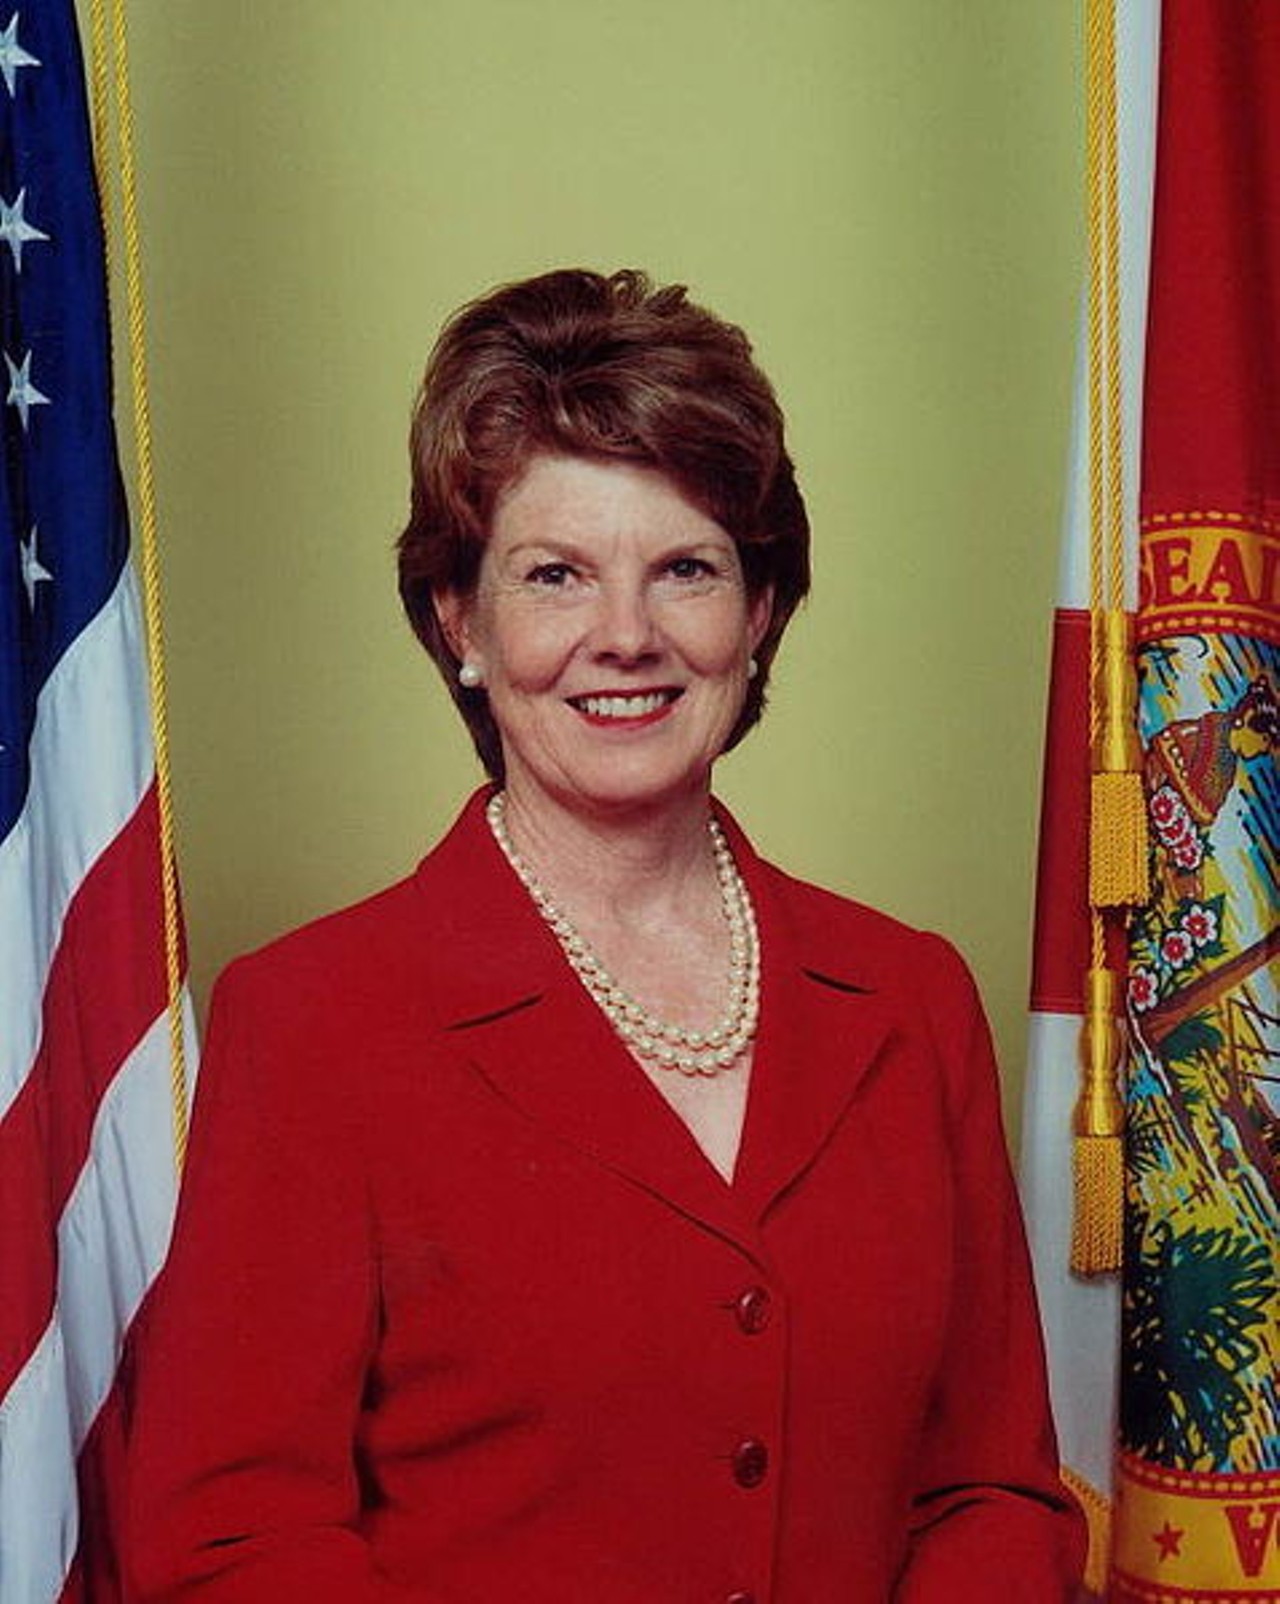 Glenda Hood- The former Secretary of State of Florida and the first women to become Mayor of Orlando.